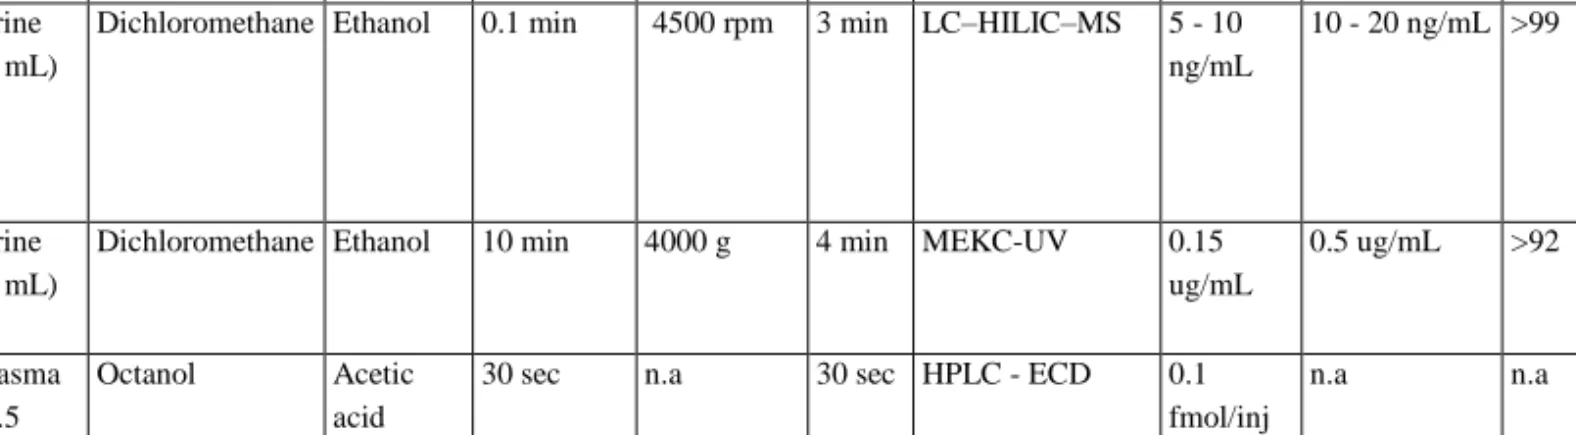 Table 4. Application of dispersive liquid-liquid microextraction for BAs determination in biological samples 